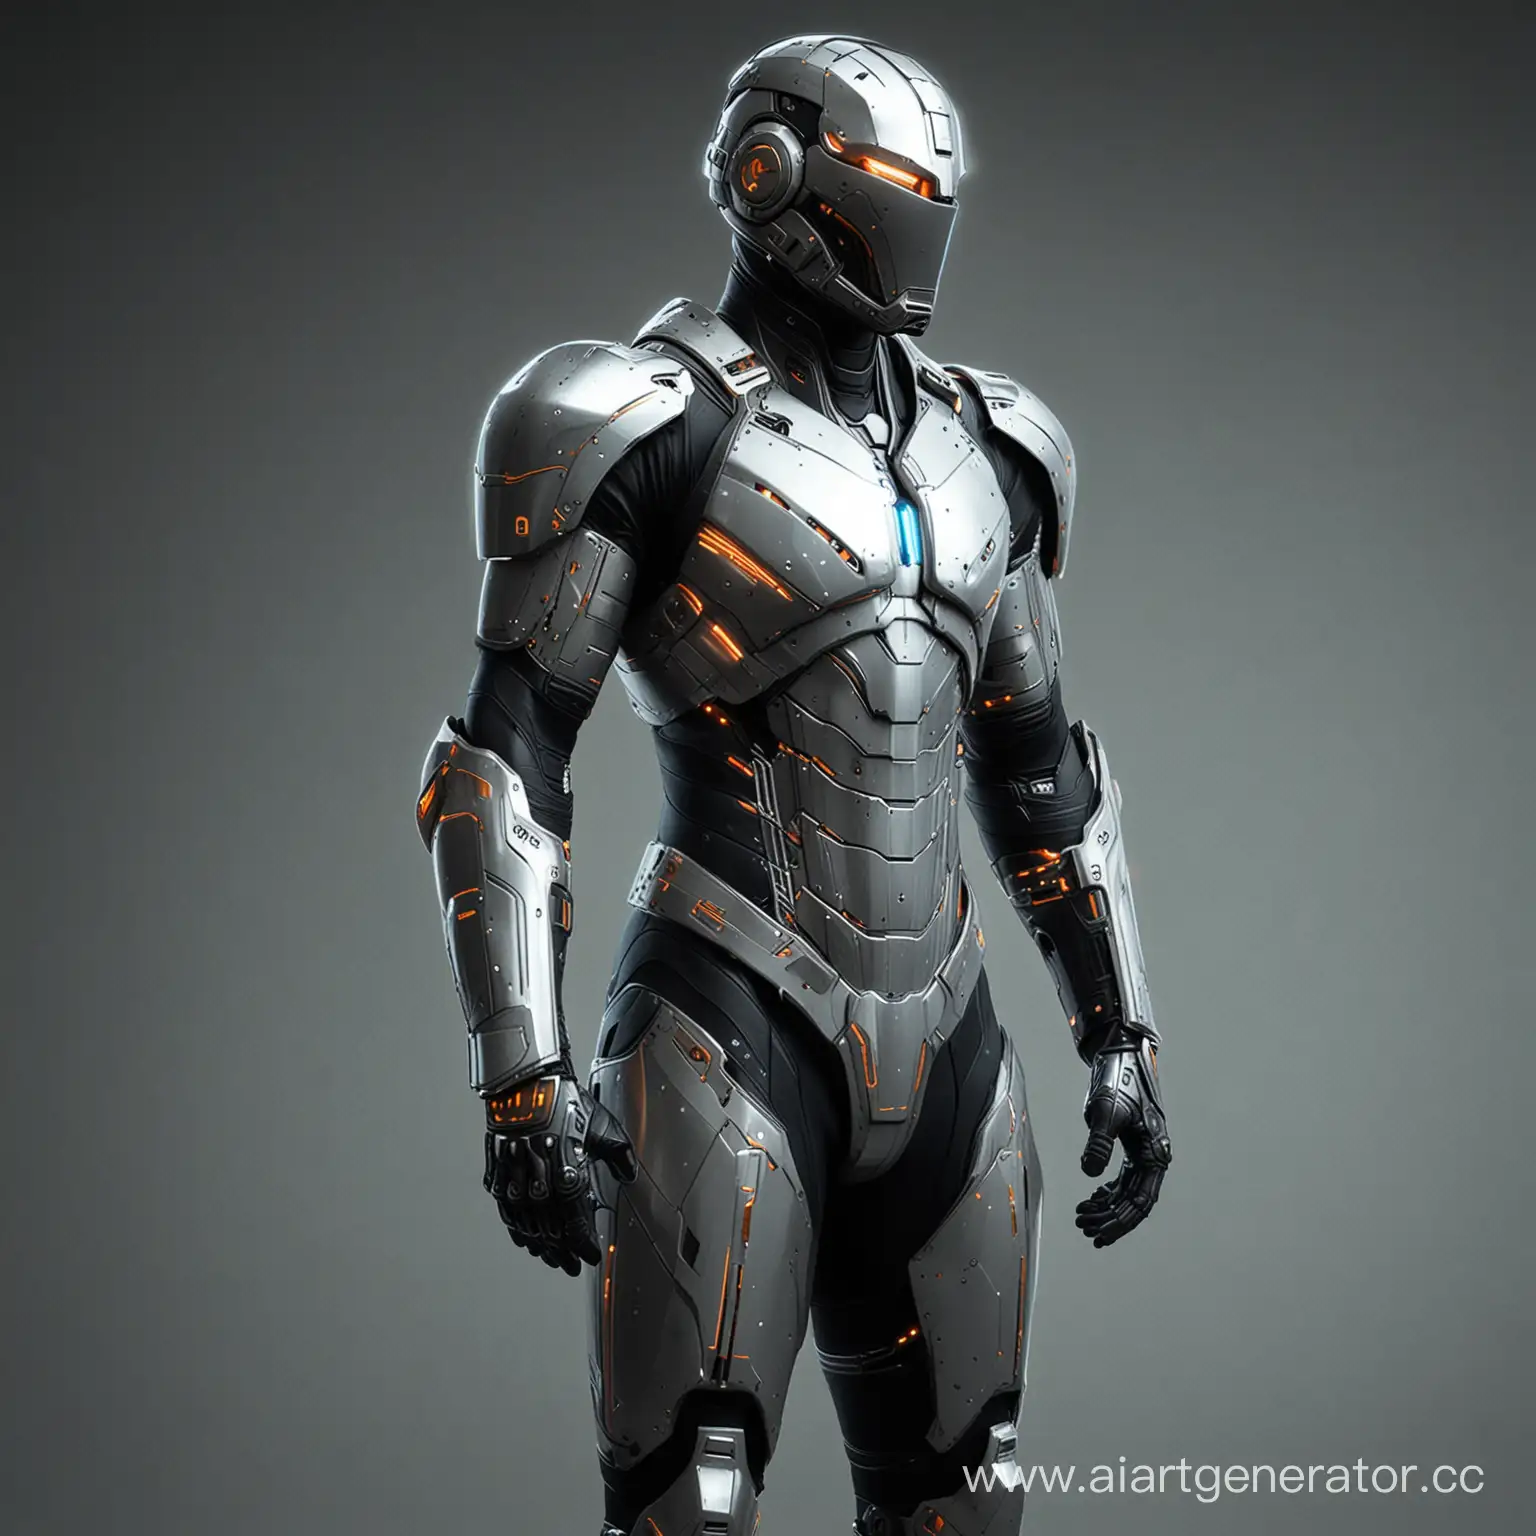  Circuit Crusaders Armor Design: The Circuit Crusader's suit is composed of sleek, form-fitting armor plating that provides both protection and flexibility. The armor is made of advanced, lightweight materials with a metallic sheen, giving it a futuristic aesthetic. It contours to the hero's body, enhancing their agility and combat prowess.

Circuitry Accents: Embedded within the armor are intricate circuitry patterns that glow with soft, pulsating light. These circuitry accents serve both decorative and functional purposes, representing the hero's connection to technology and their ability to manipulate electronic systems





